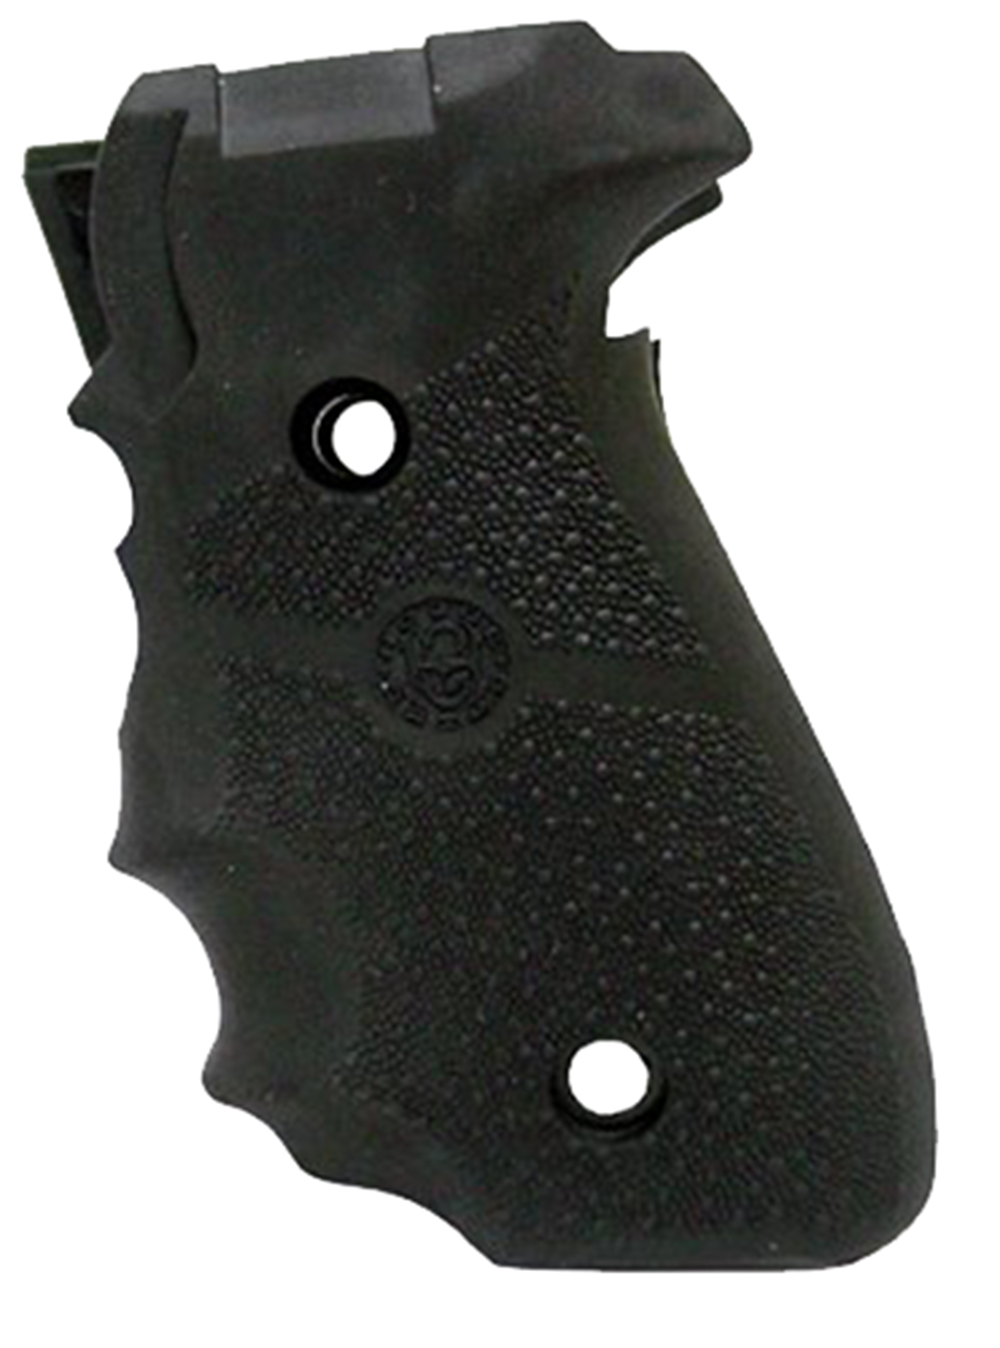 Hogue 28000 Rubber Grip  Black with Finger Grooves for Sig P228, P229